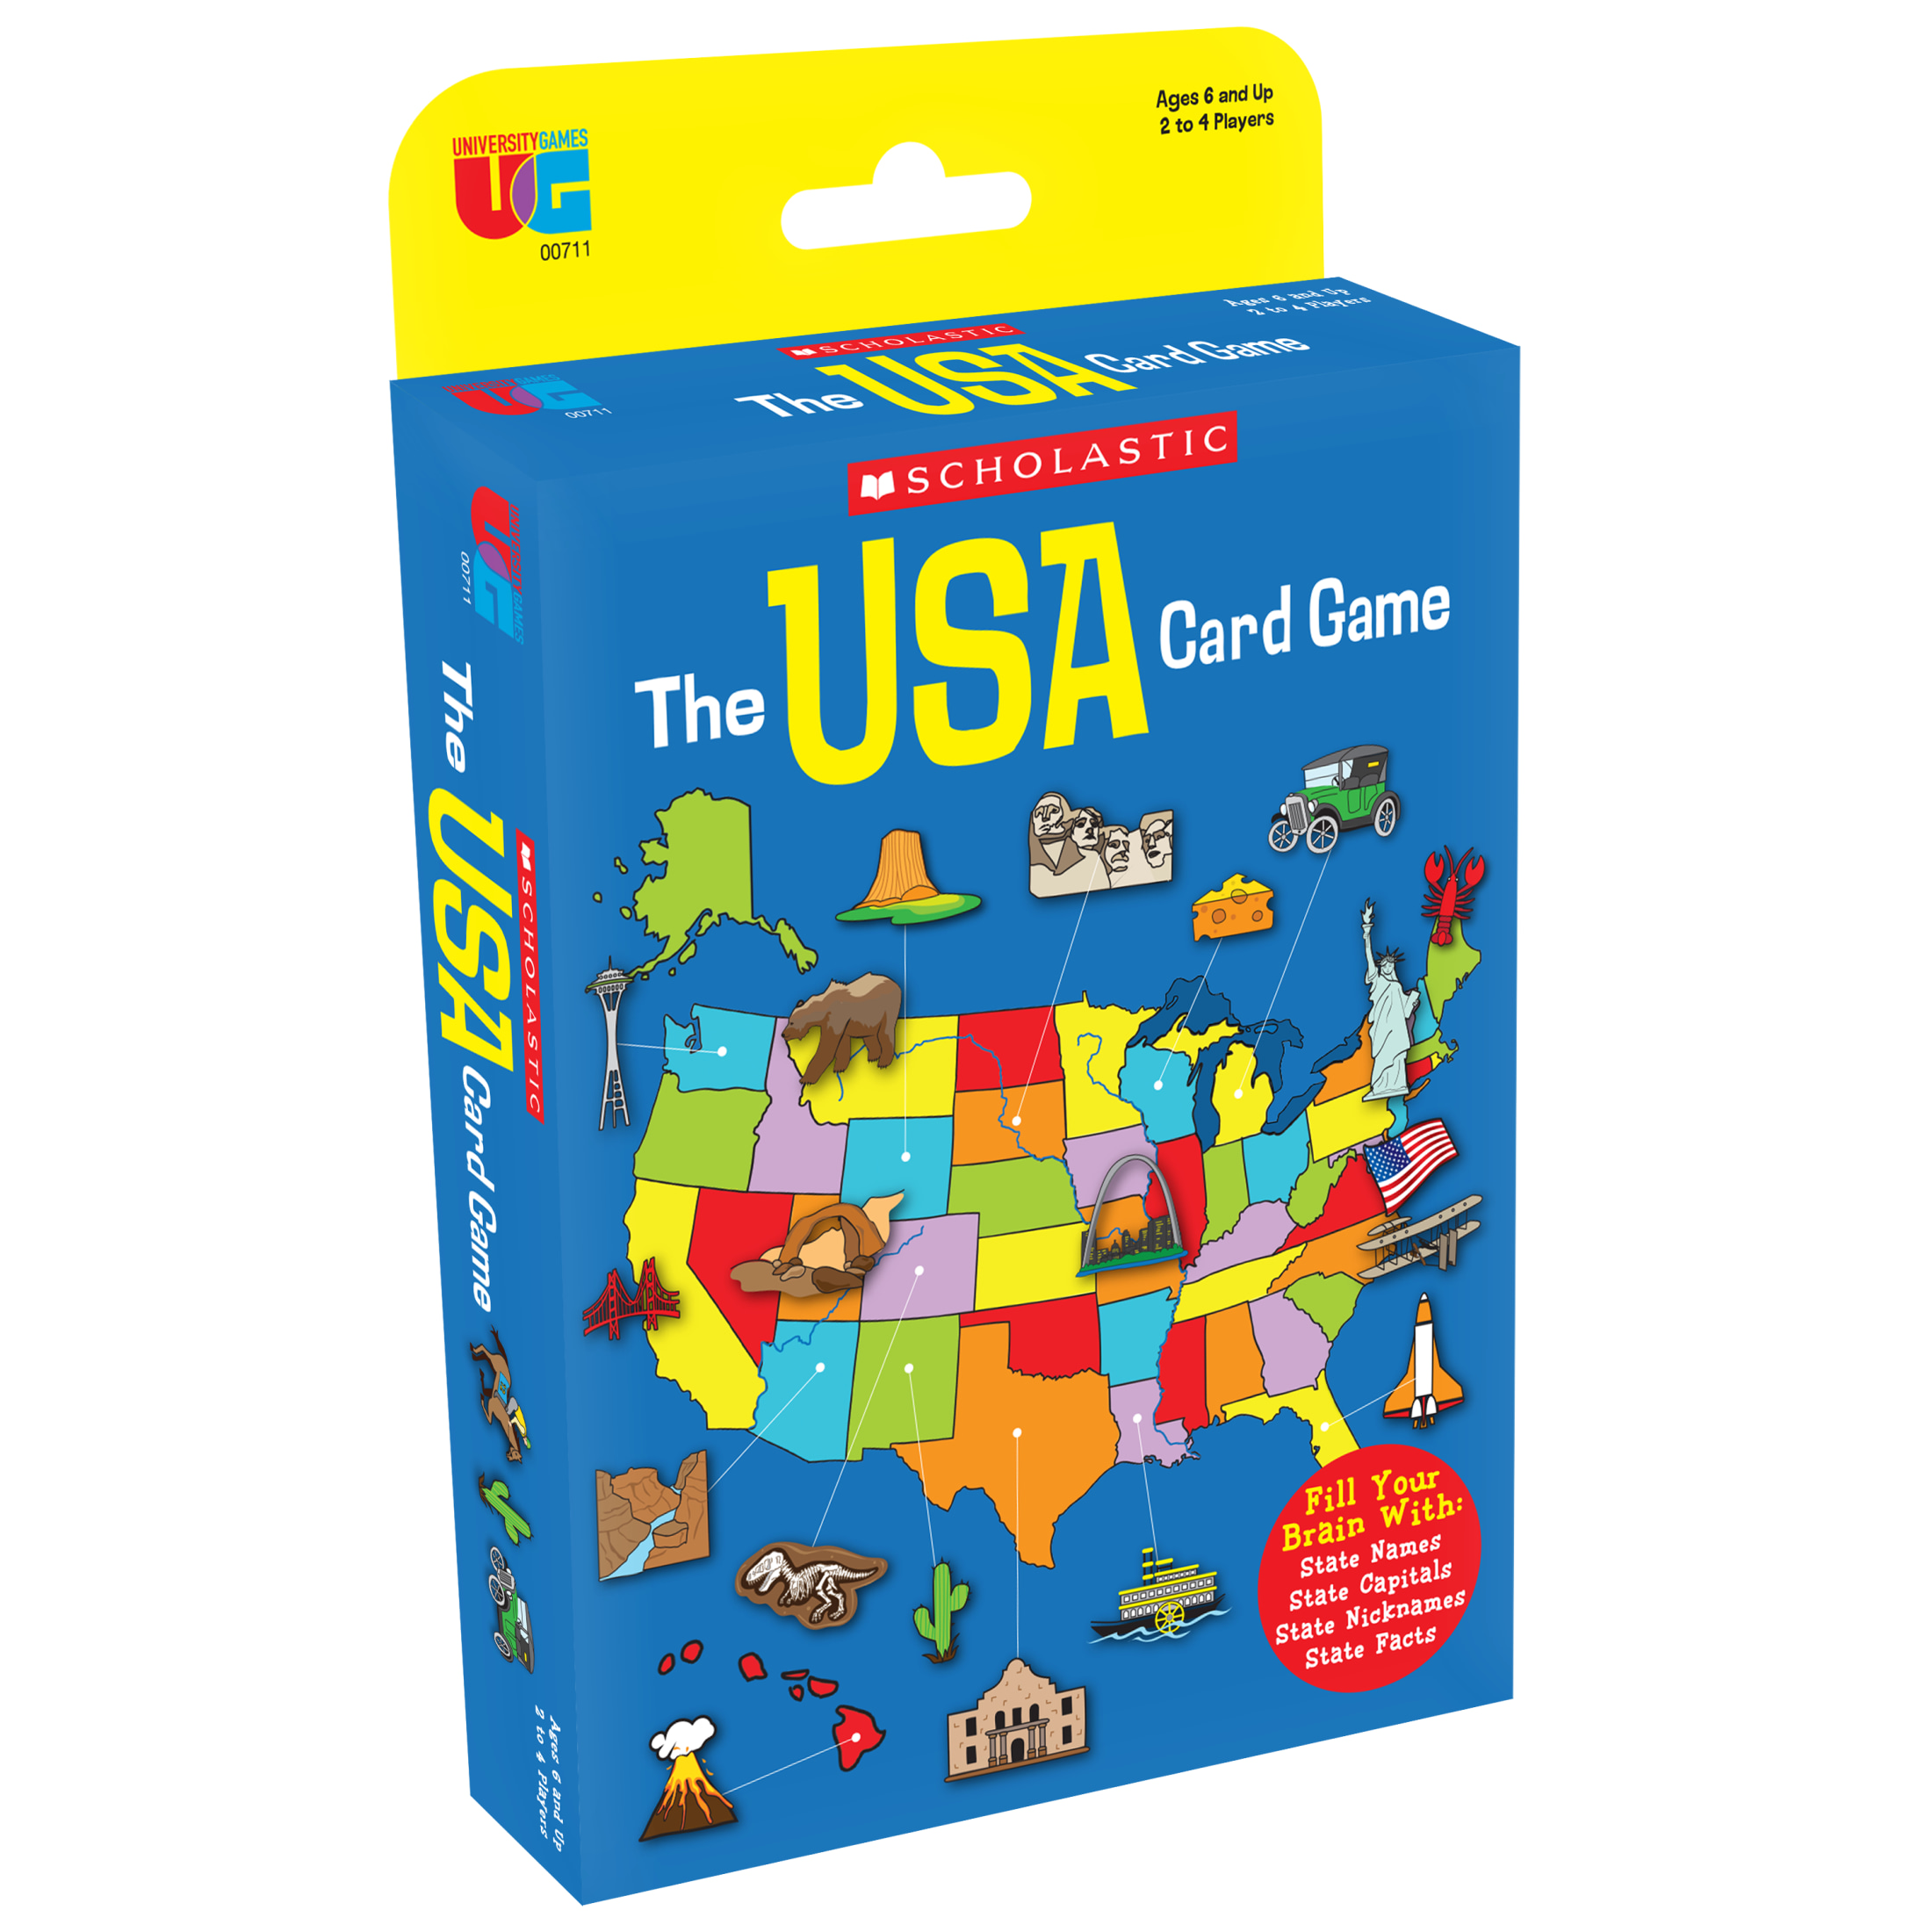 Scholastic USA Travel Card Game from University Games, for Ages 6 and Up - image 1 of 6